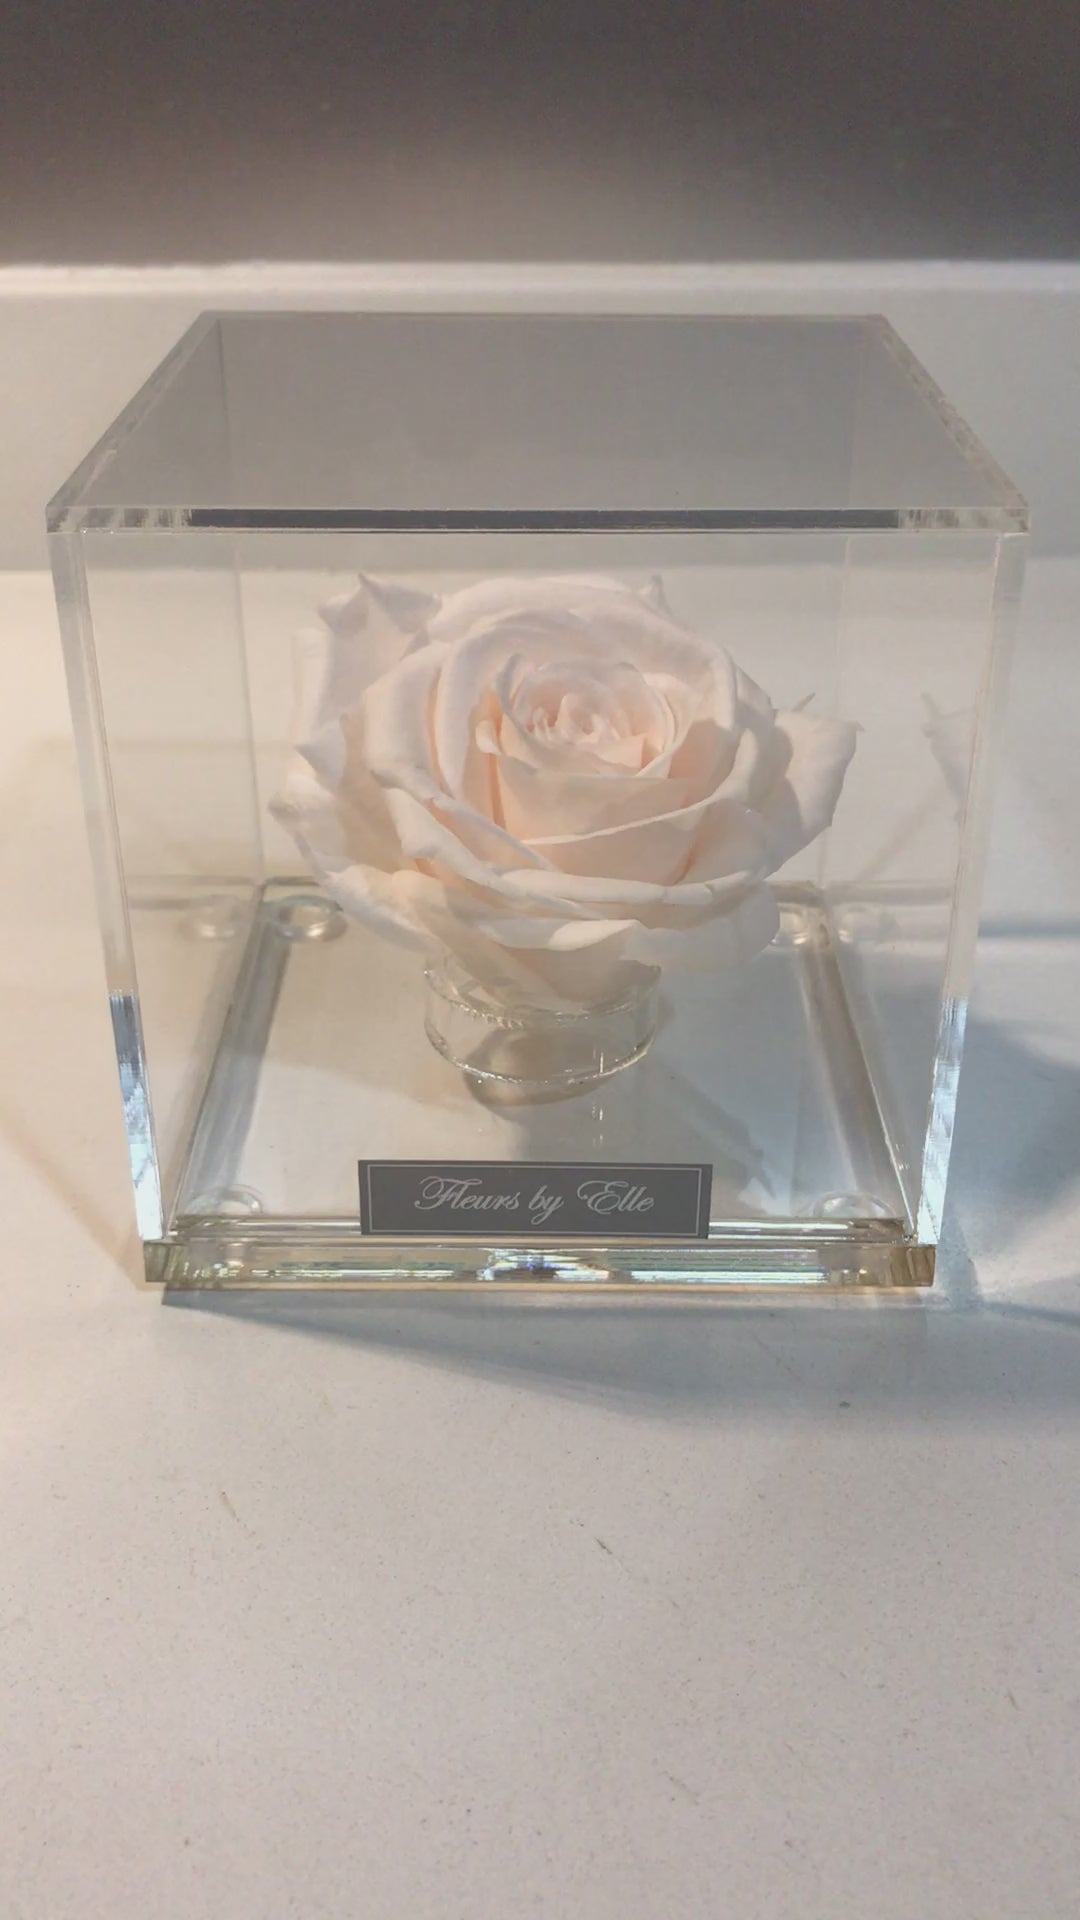 The Rose Cube Pearl